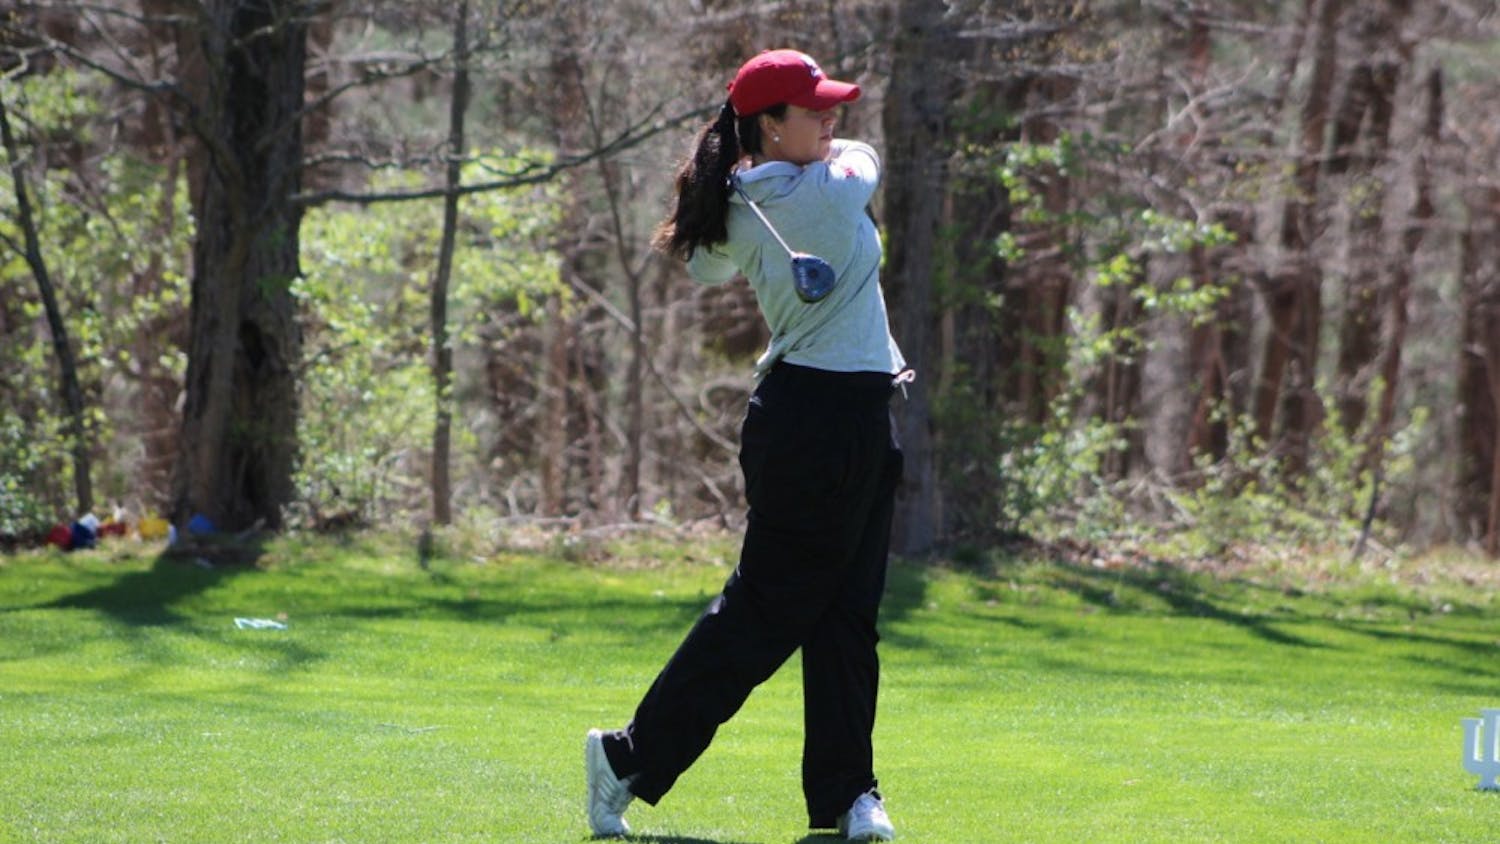 Senior Ana Sanjuan tees off during the first round of the IU Invitational at IU Golf Course. Sanjuan and the Hoosiers will compete in the Big Ten Championships this weekend.